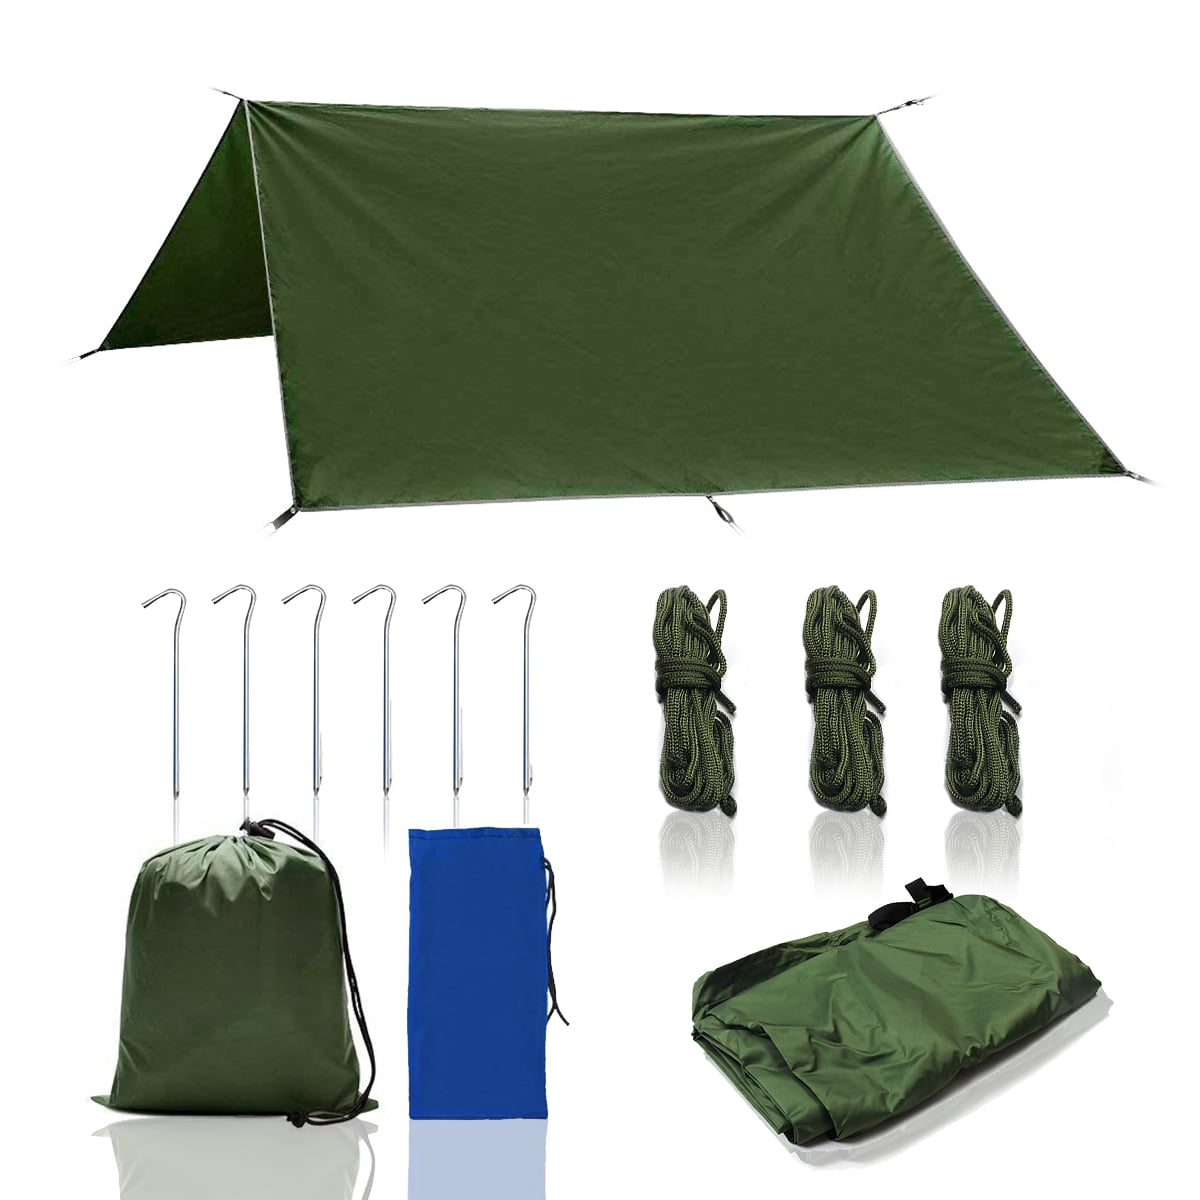 Hiking Bearhard Rain Fly Camping Tarp 10x12ft /10x10ft Hammock Fly Include 6 Ropes and 4 Stakes Lightweight Waterproof Tent Tarp Perfect for Camping Picnic